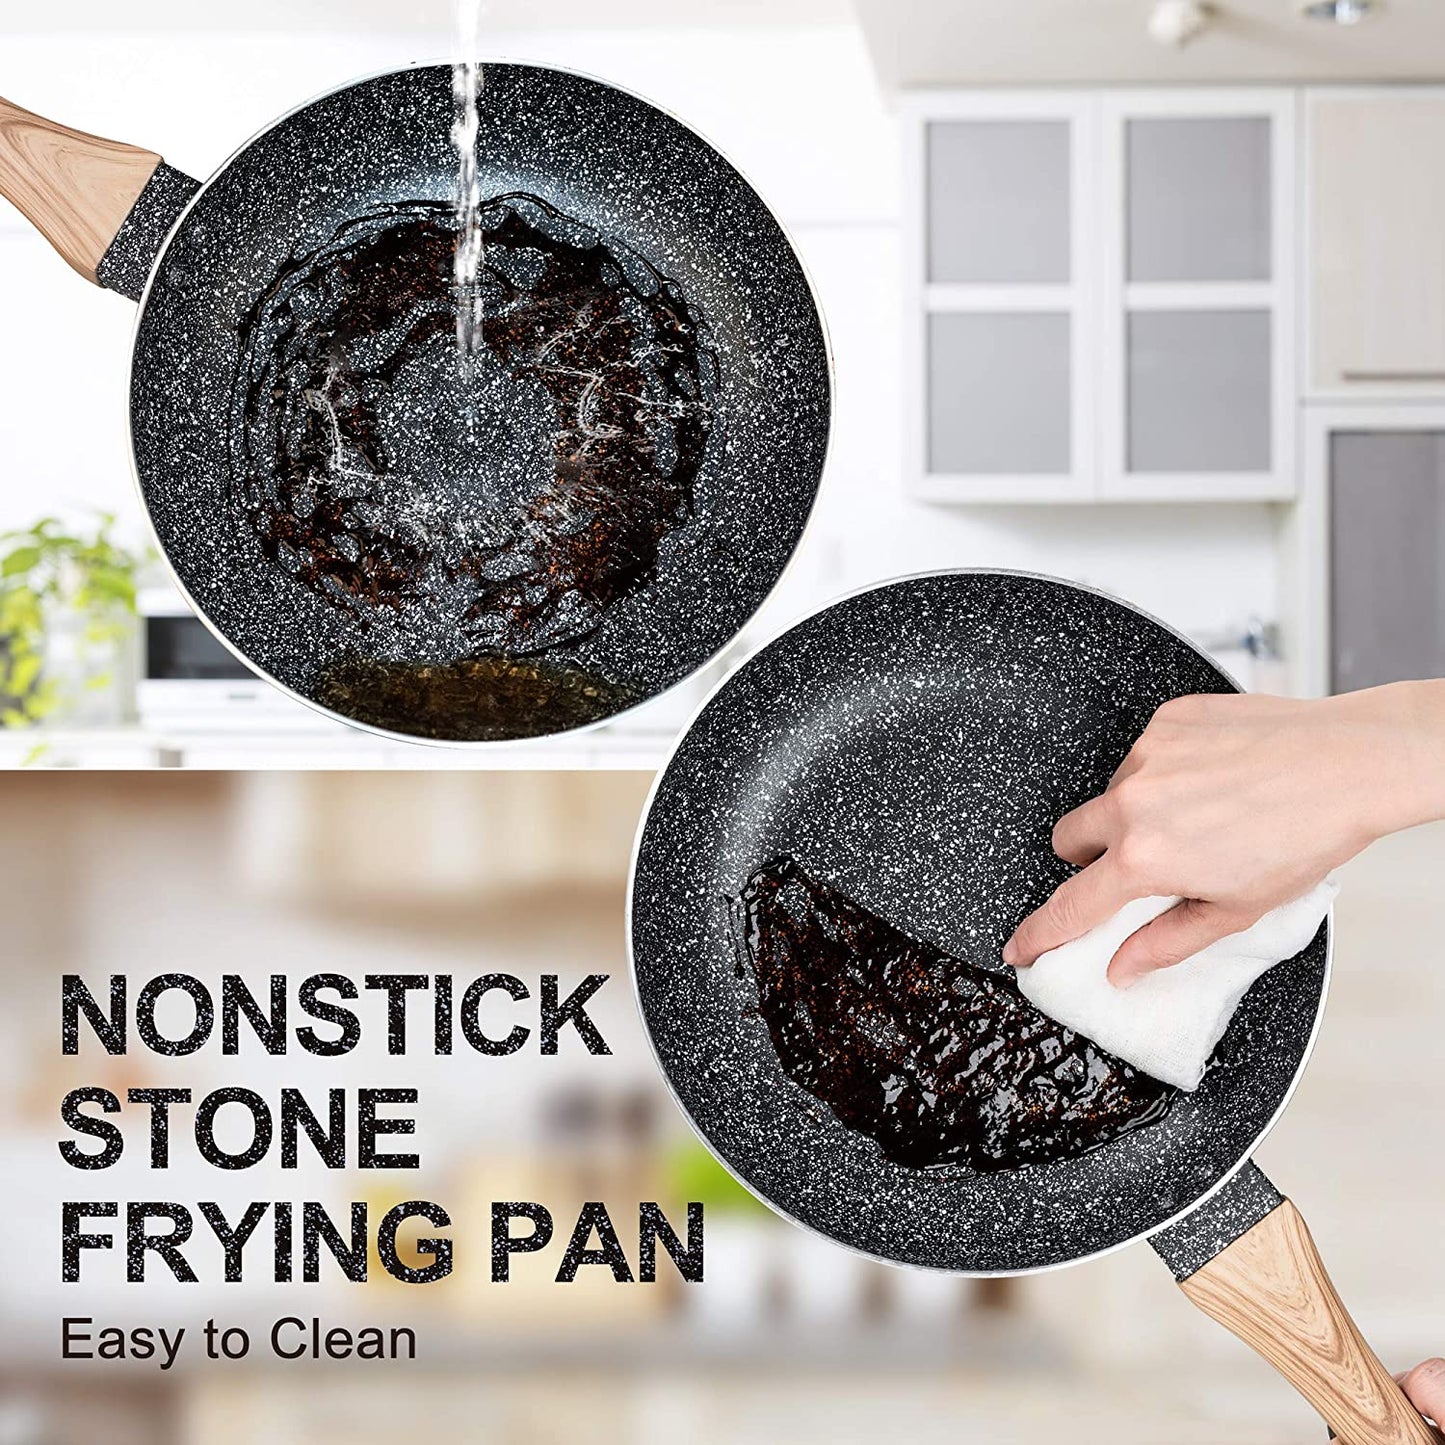 Premium 3 Piece Stone Coated Nonstick Frying Pan Set with Bakelite Handle, APEO & Pfoa-Free Coating, Includes 8", 9.5" and 11" Skillets